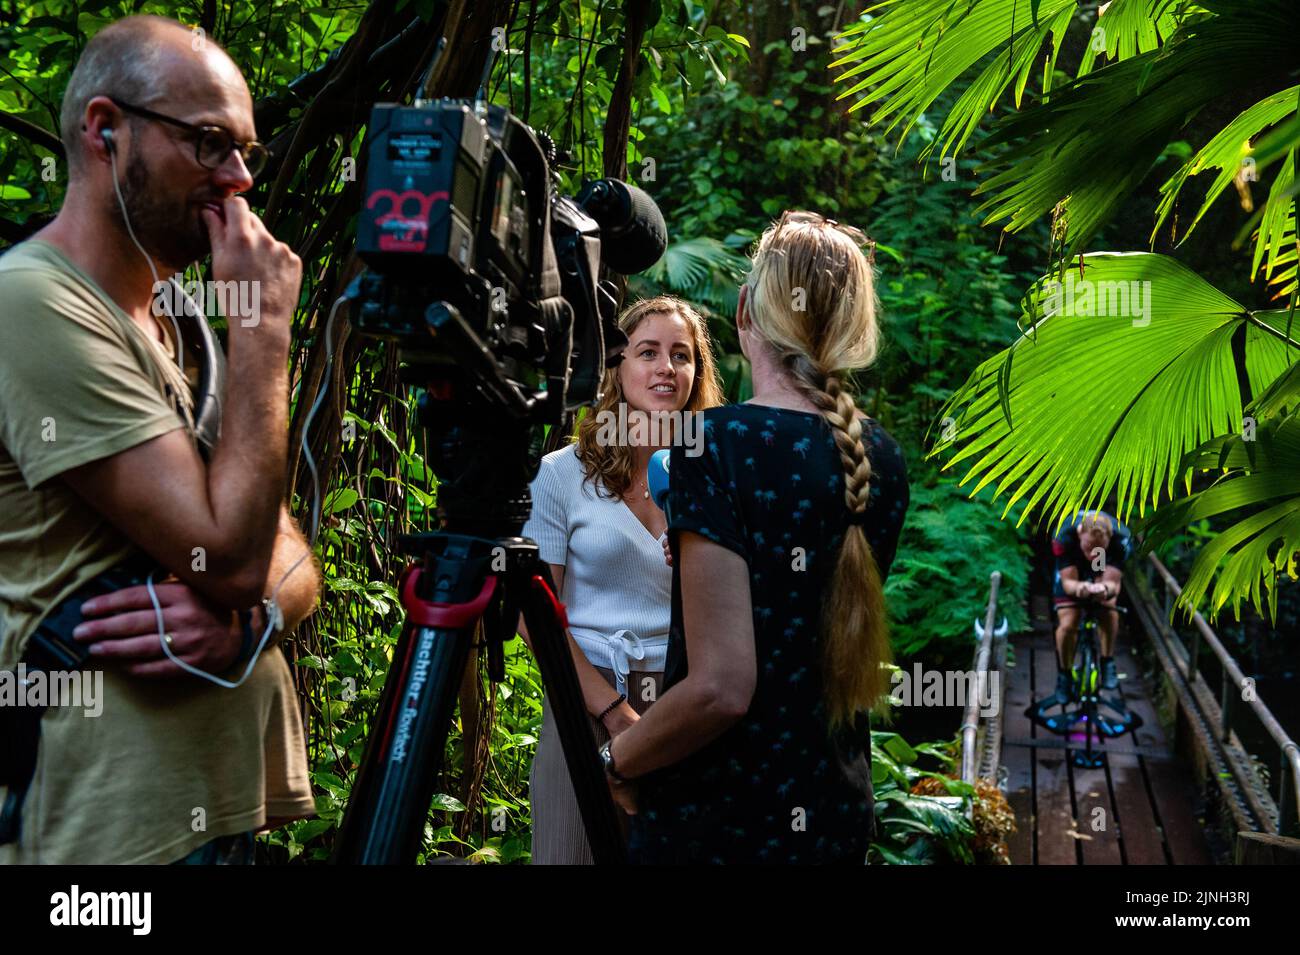 Athlete Olaf Van Den Bergh's girlfriend seen being interviewed. Dutch top athlete Olaf Van Den Bergh starts training in the indoor tropical rainforest of the Burgers' Zoo in Arnhem, in preparation for the Ironman World Championships in Kailua-Kona located in Hawaii. The Bush (indoor tropical rainforest) is the ideal training location because of the high humidity and temperature. (Photo by Ana Fernandez / SOPA Images/Sipa USA) Stock Photo